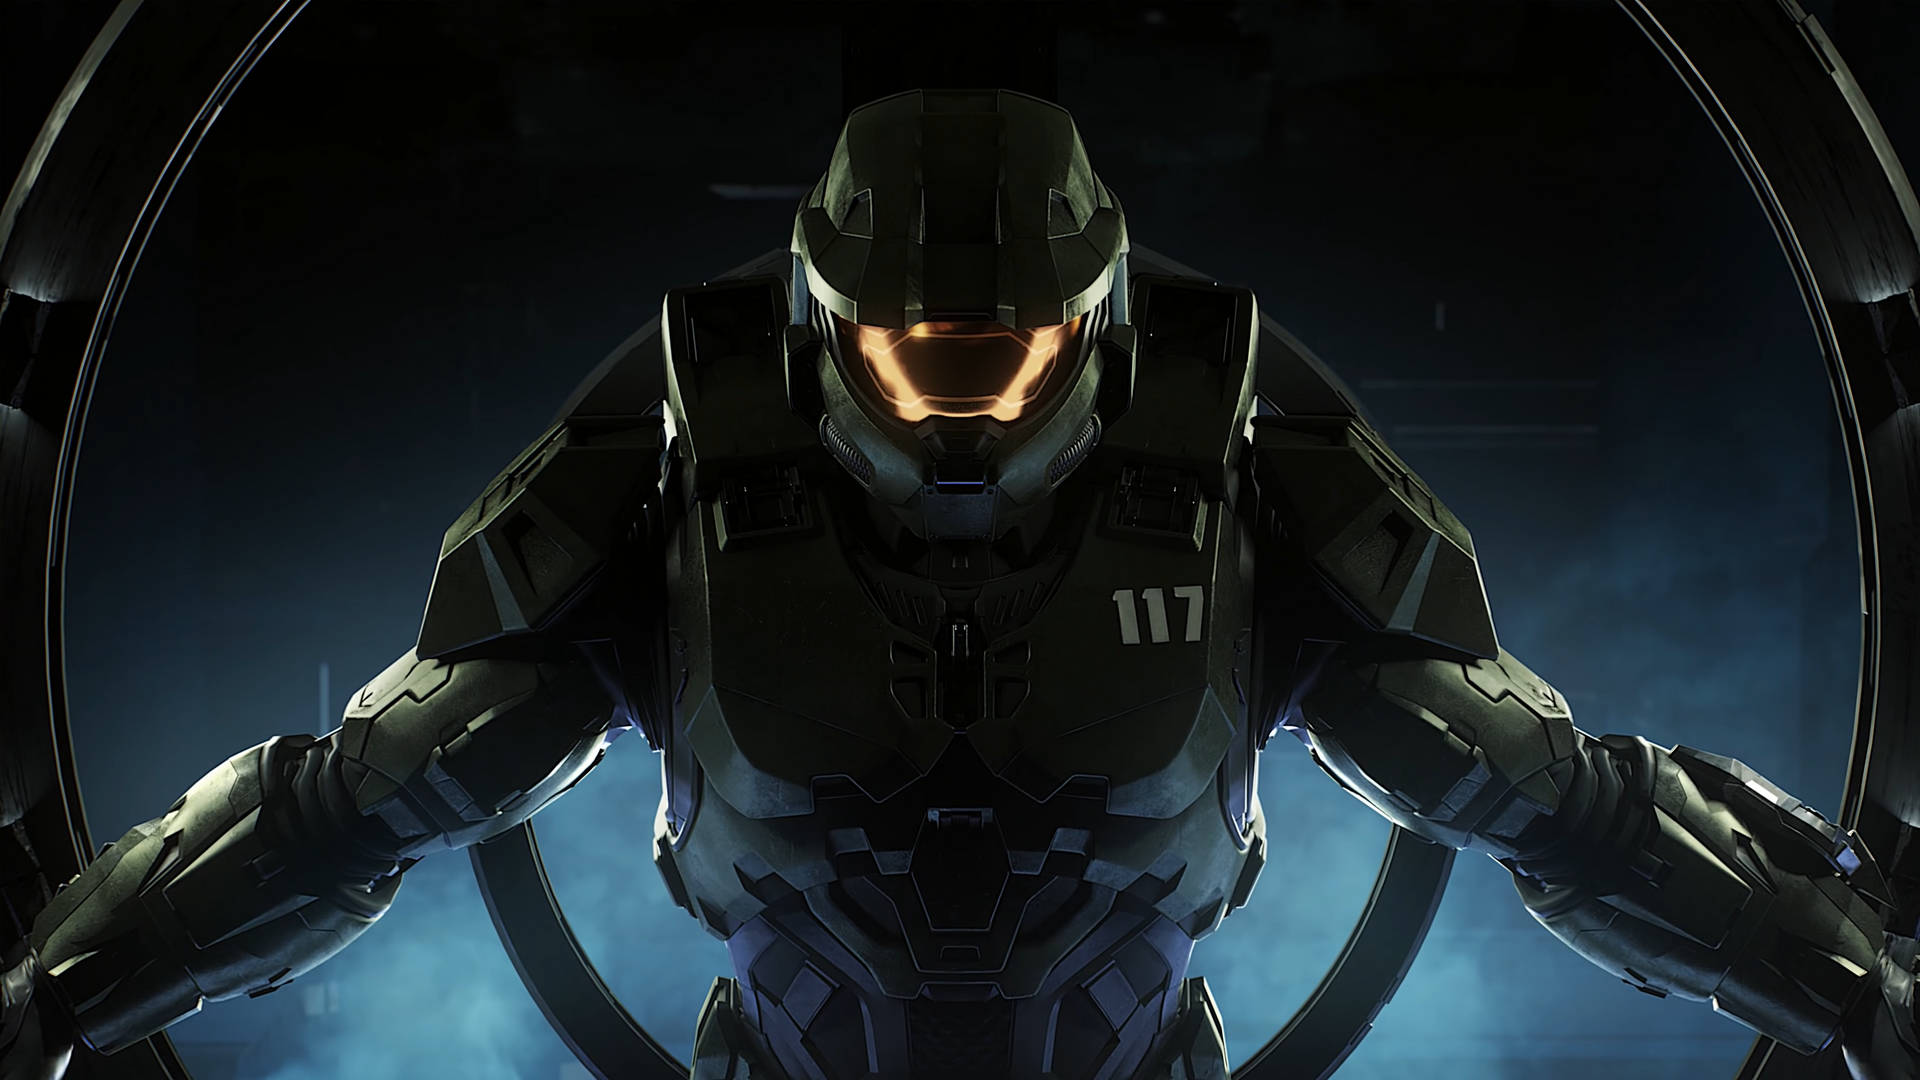 4K Master Chief Arms Spread Out Wallpaper